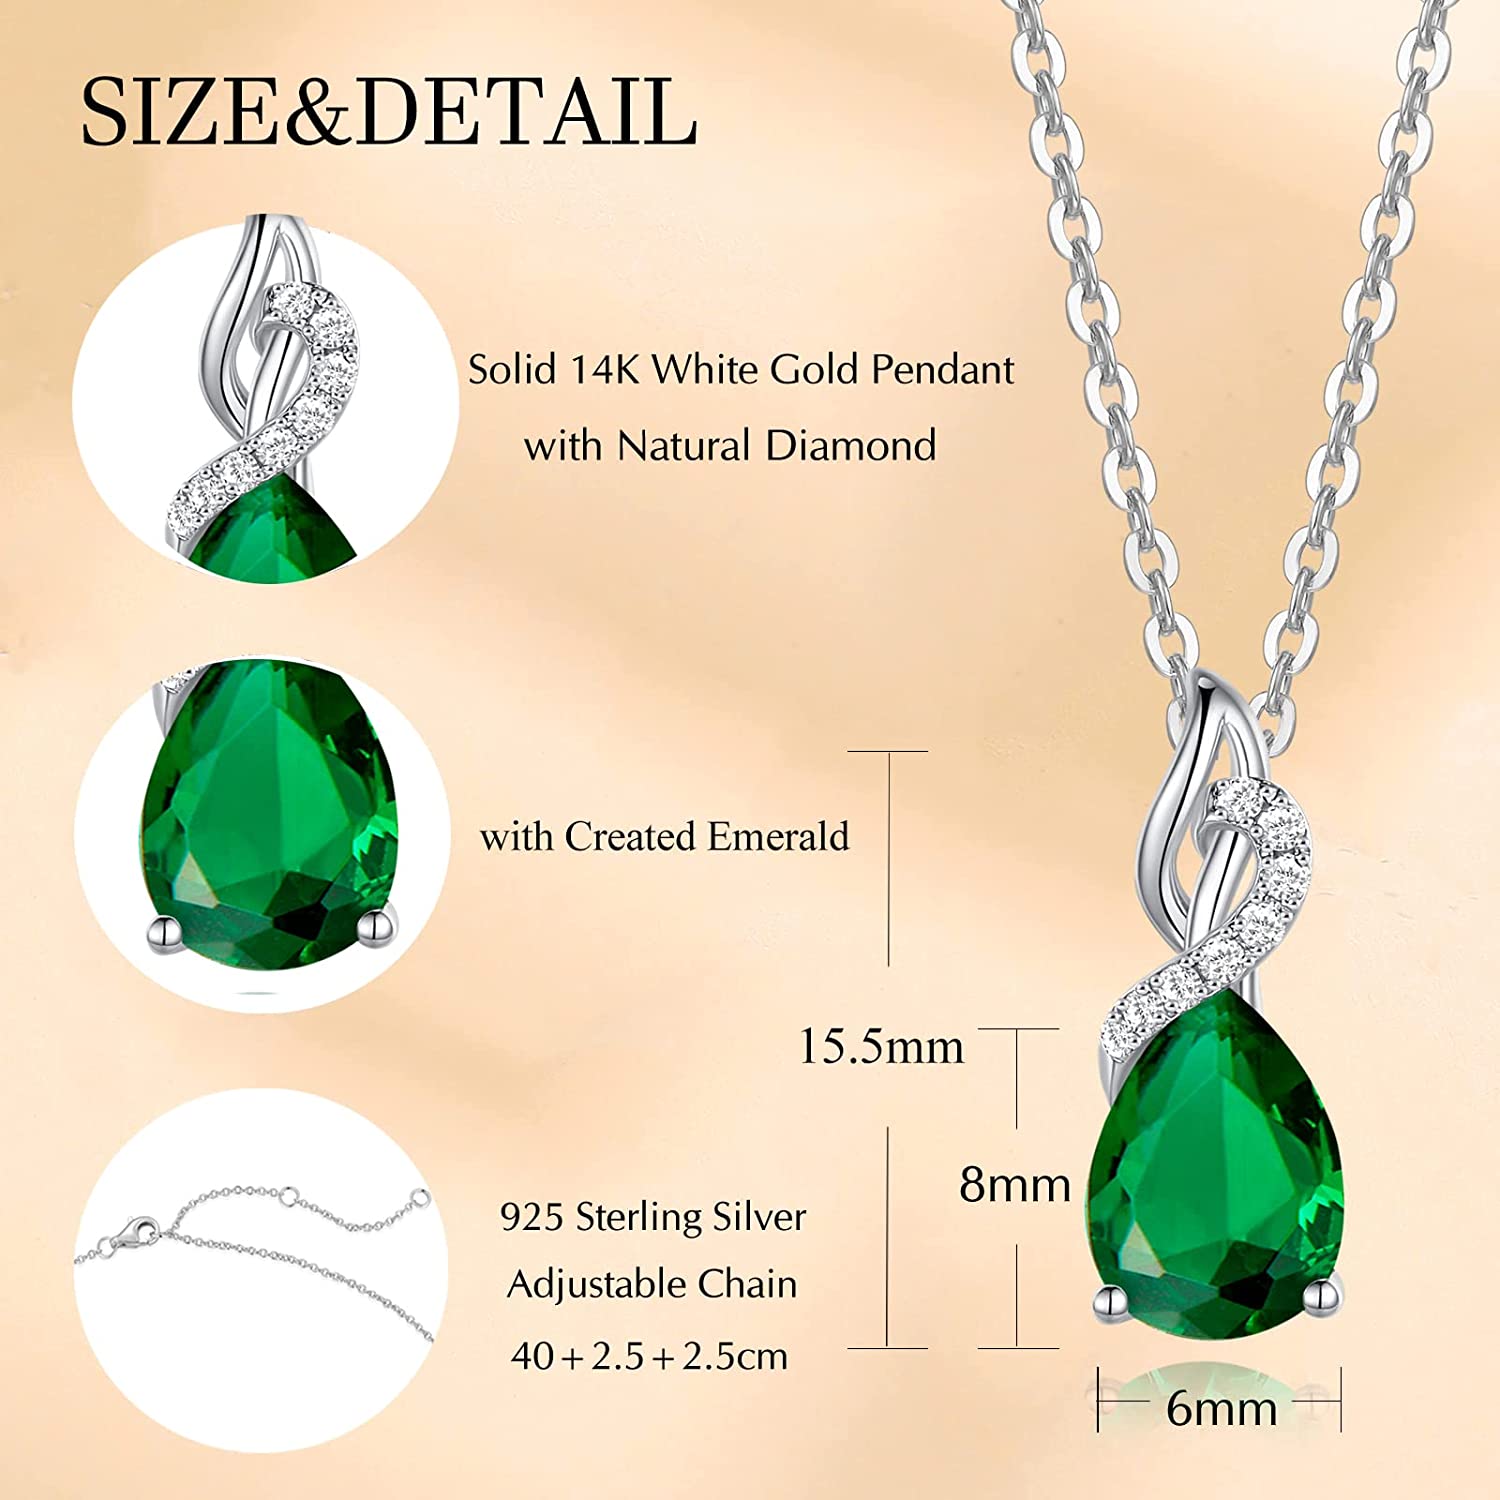 FANCIME "Timeless Heart" Emerald May Gemstone Sterling Silver Necklace Size